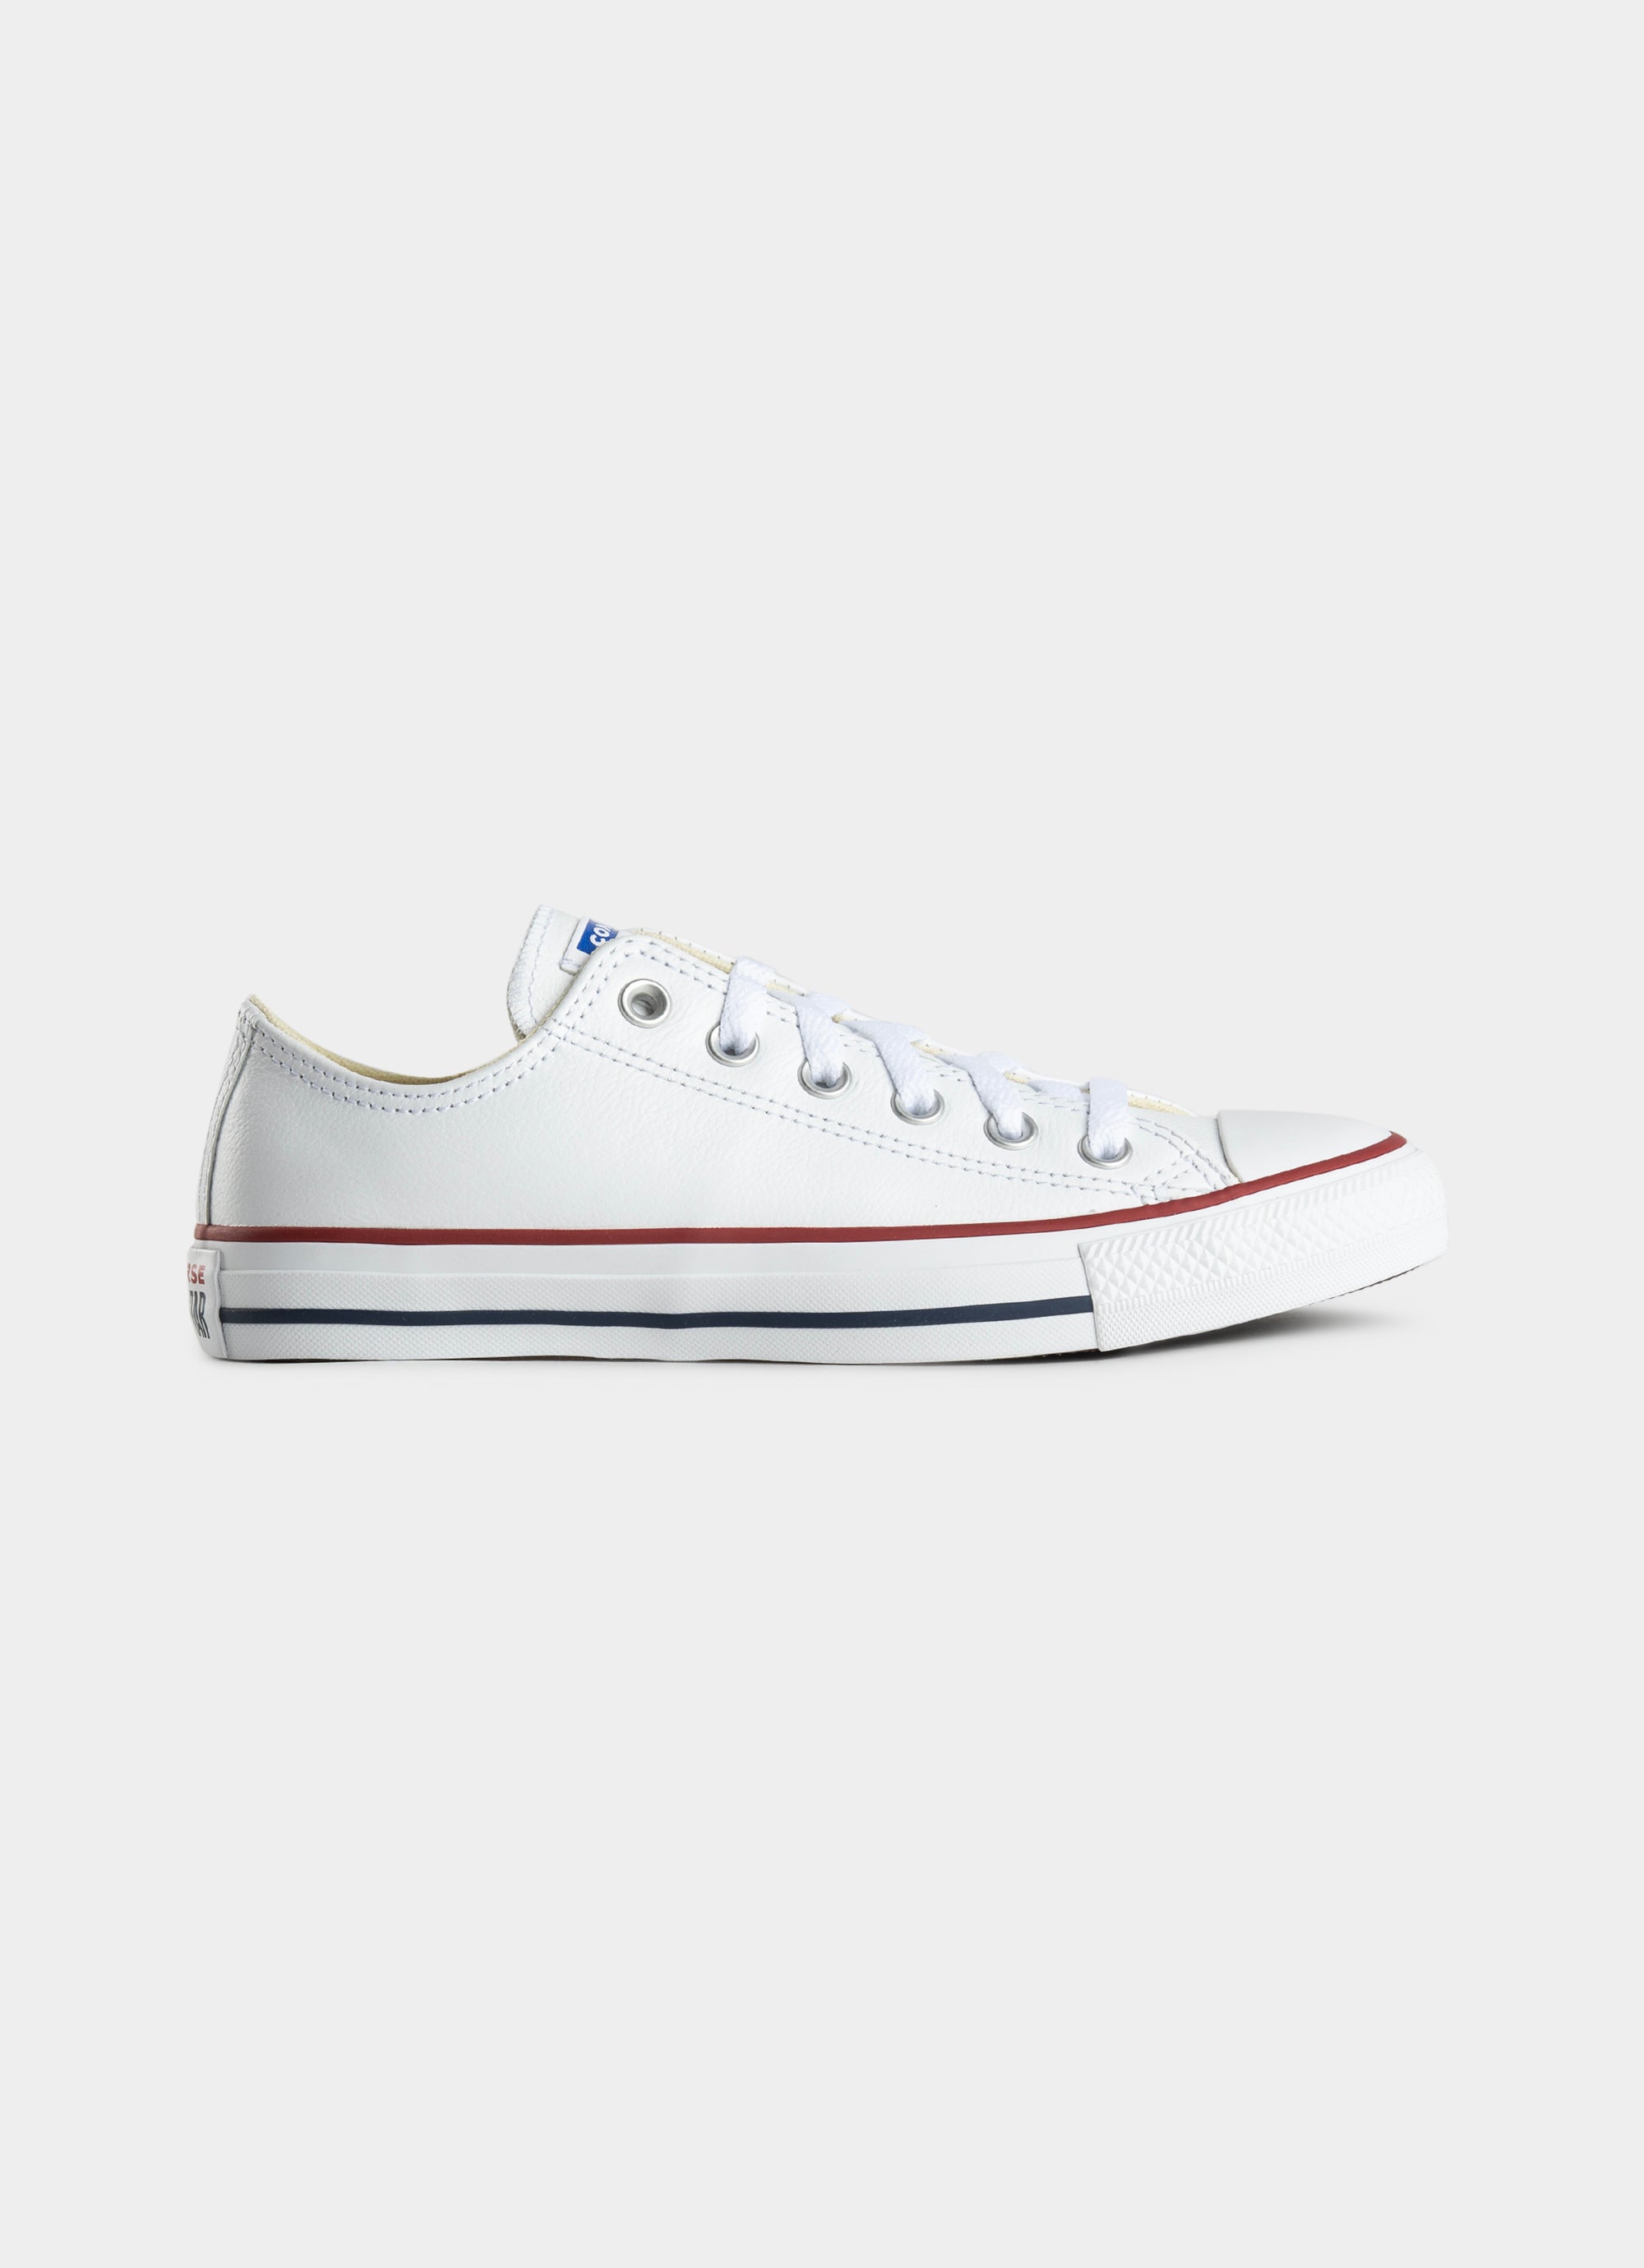 Converse Chuck Taylor All Star Low 'leather' Shoe in Unknown | Red Rat